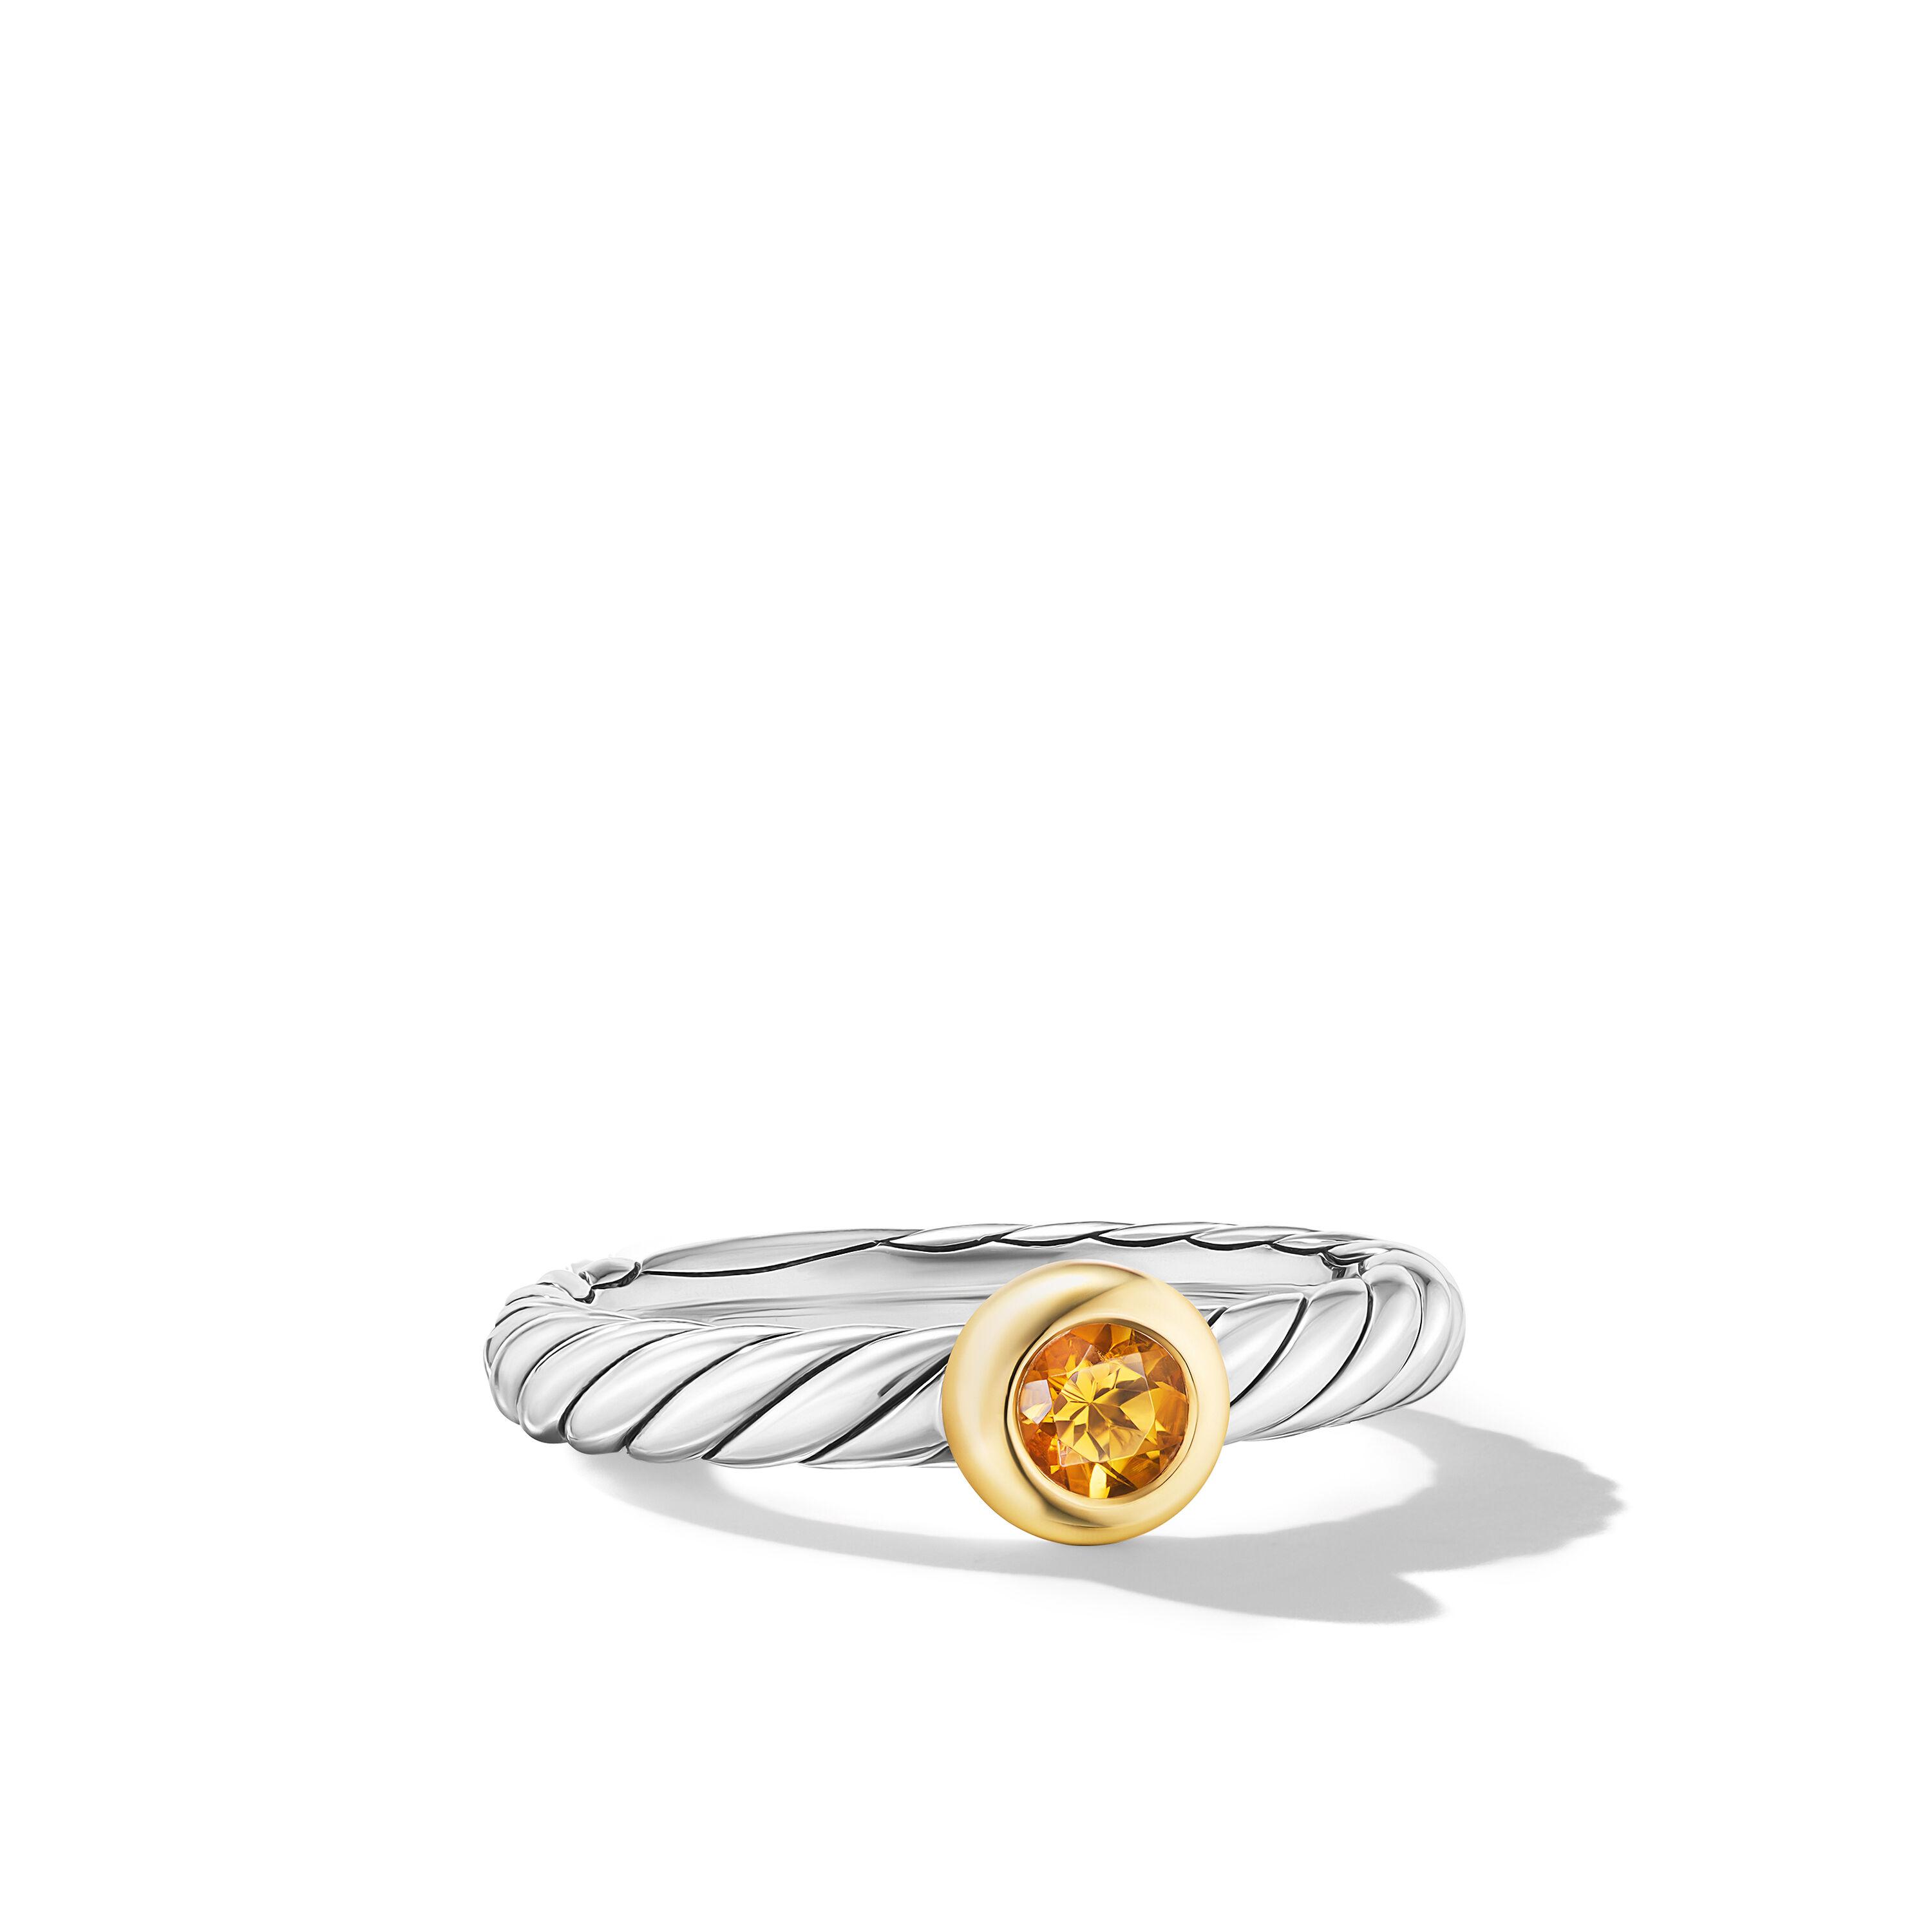 David Yurman Petite Cable Ring in Sterling Silver with 14K Yellow Gold and Citrine, Size 6 0